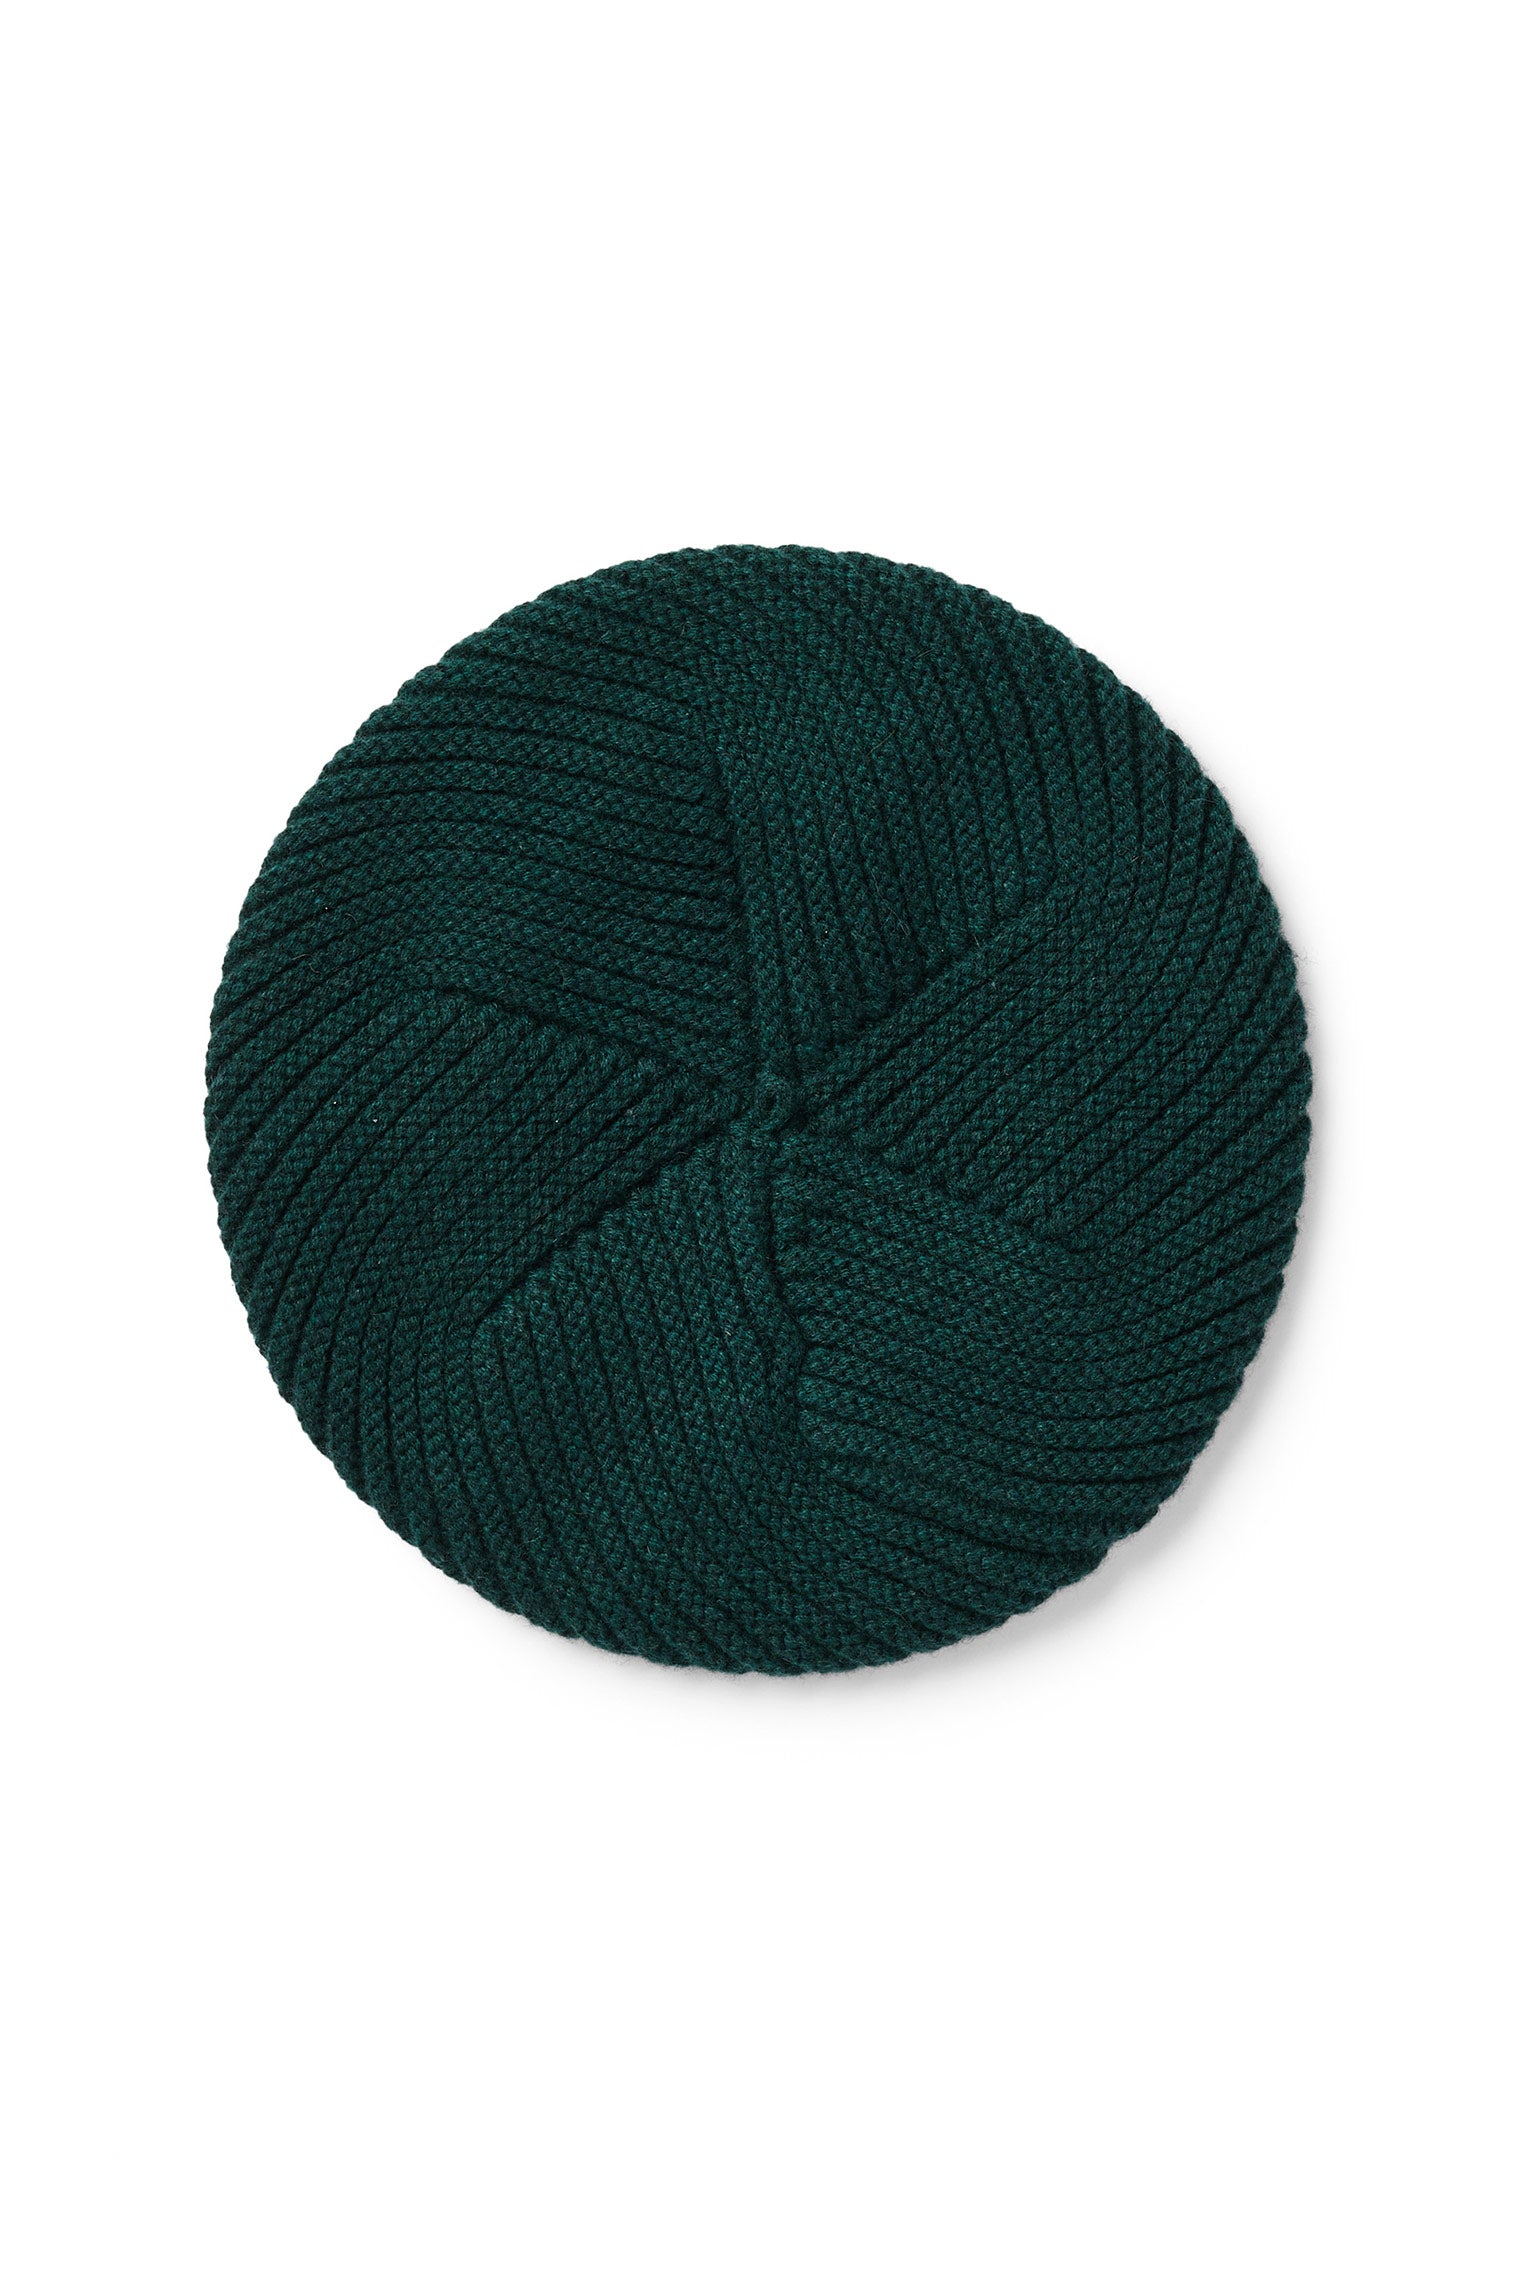 Green Knitted Cashmere Beret - Lock & Co. Christmas Gift Edit - Lock & Co. Hatters London UK